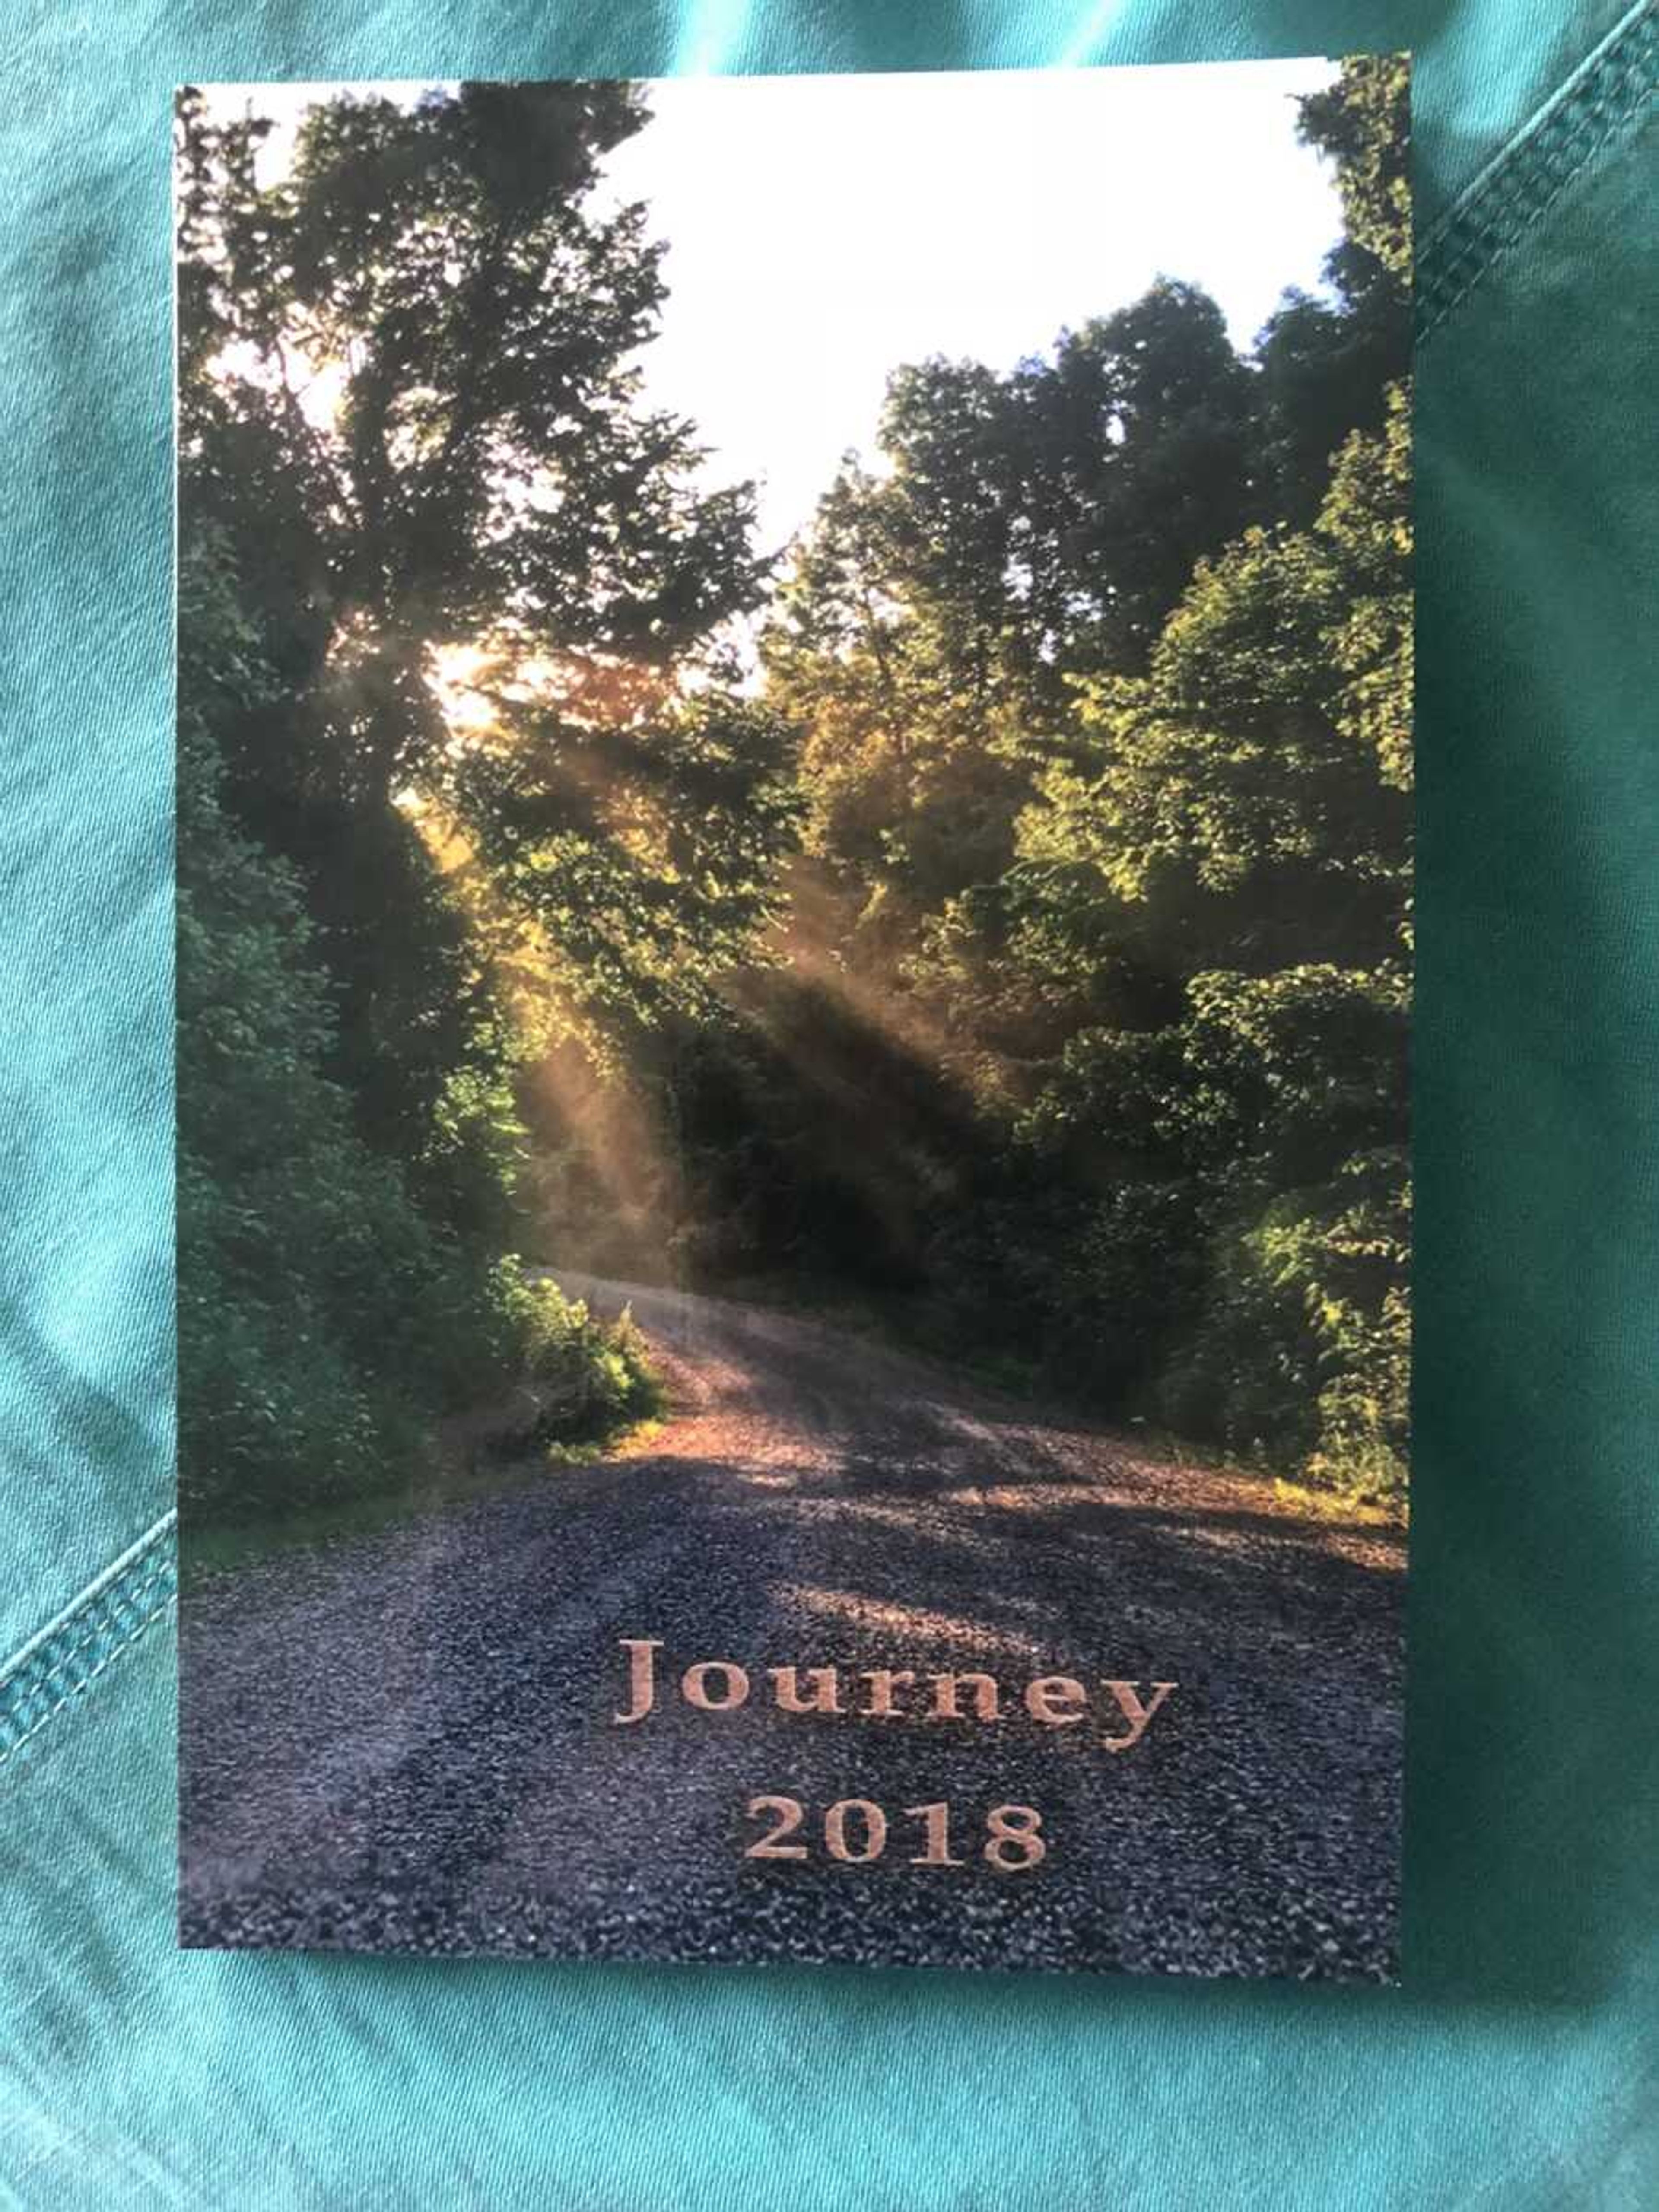 The 2018 edition of "Journey," which was published this summer.